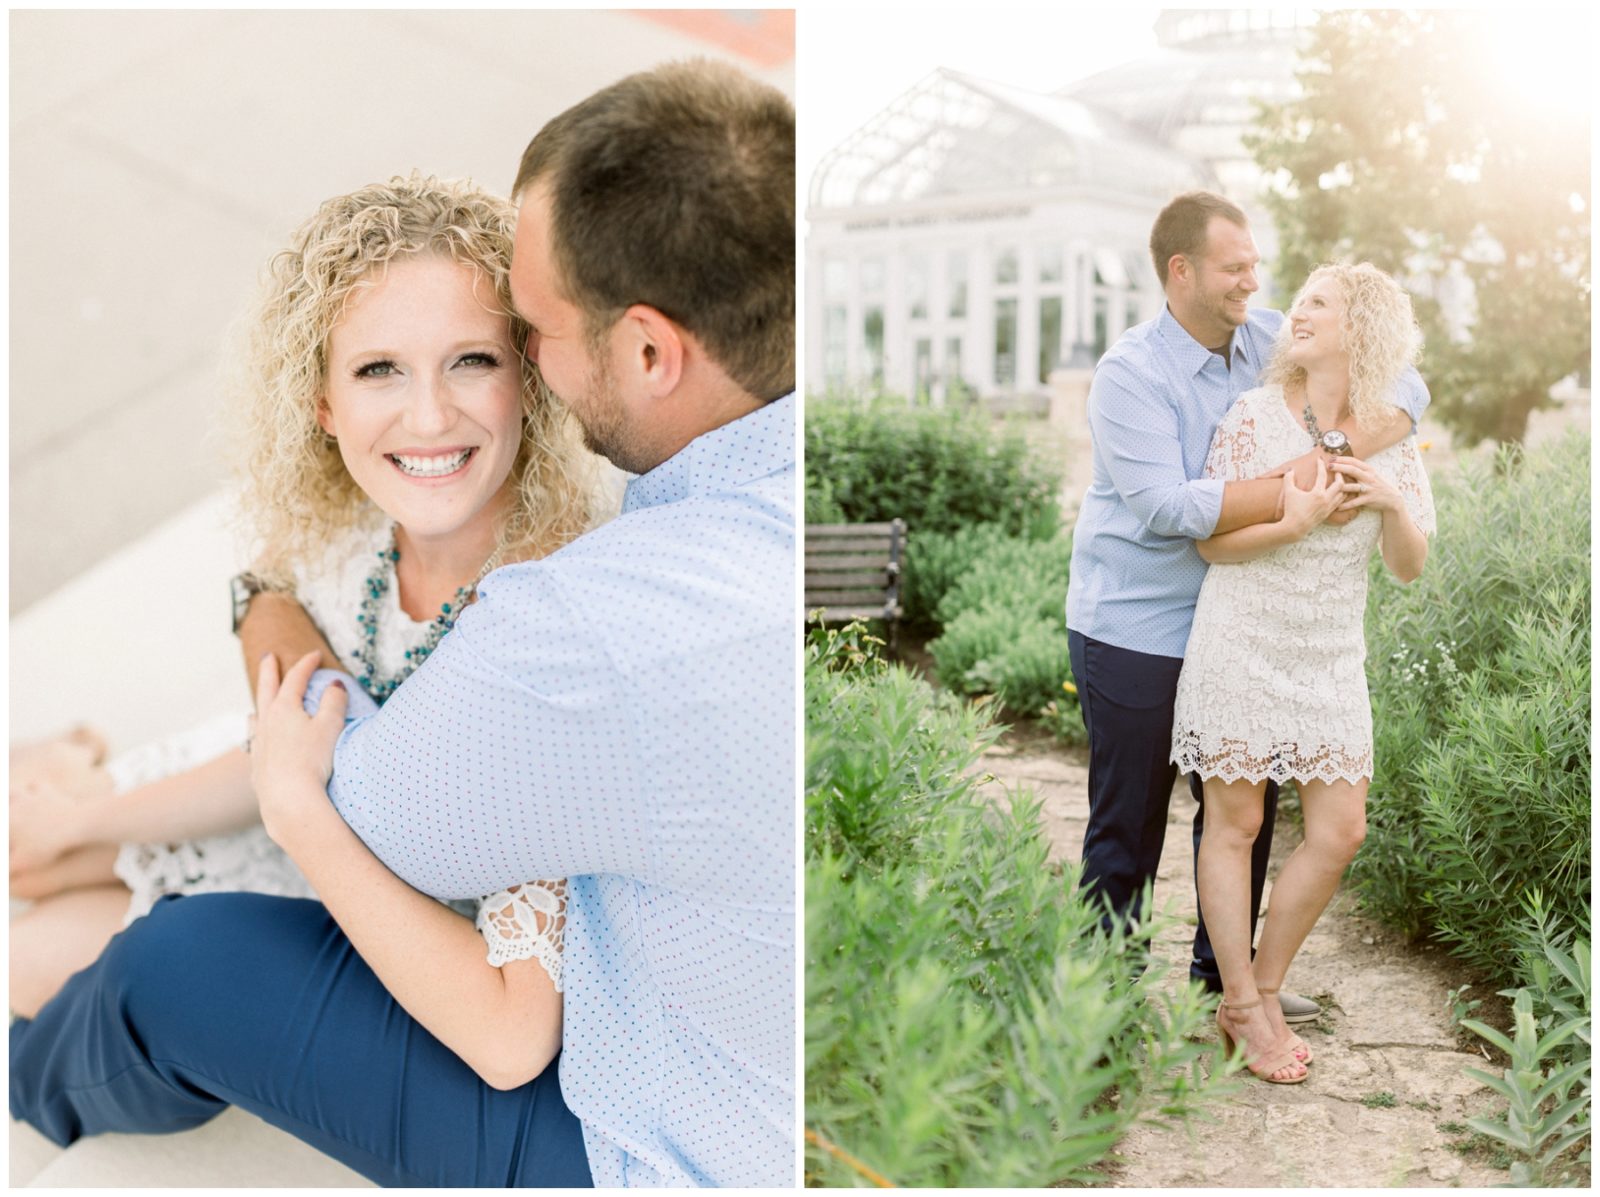 Light and airy St Paul Engagement Session at Como Conservatory